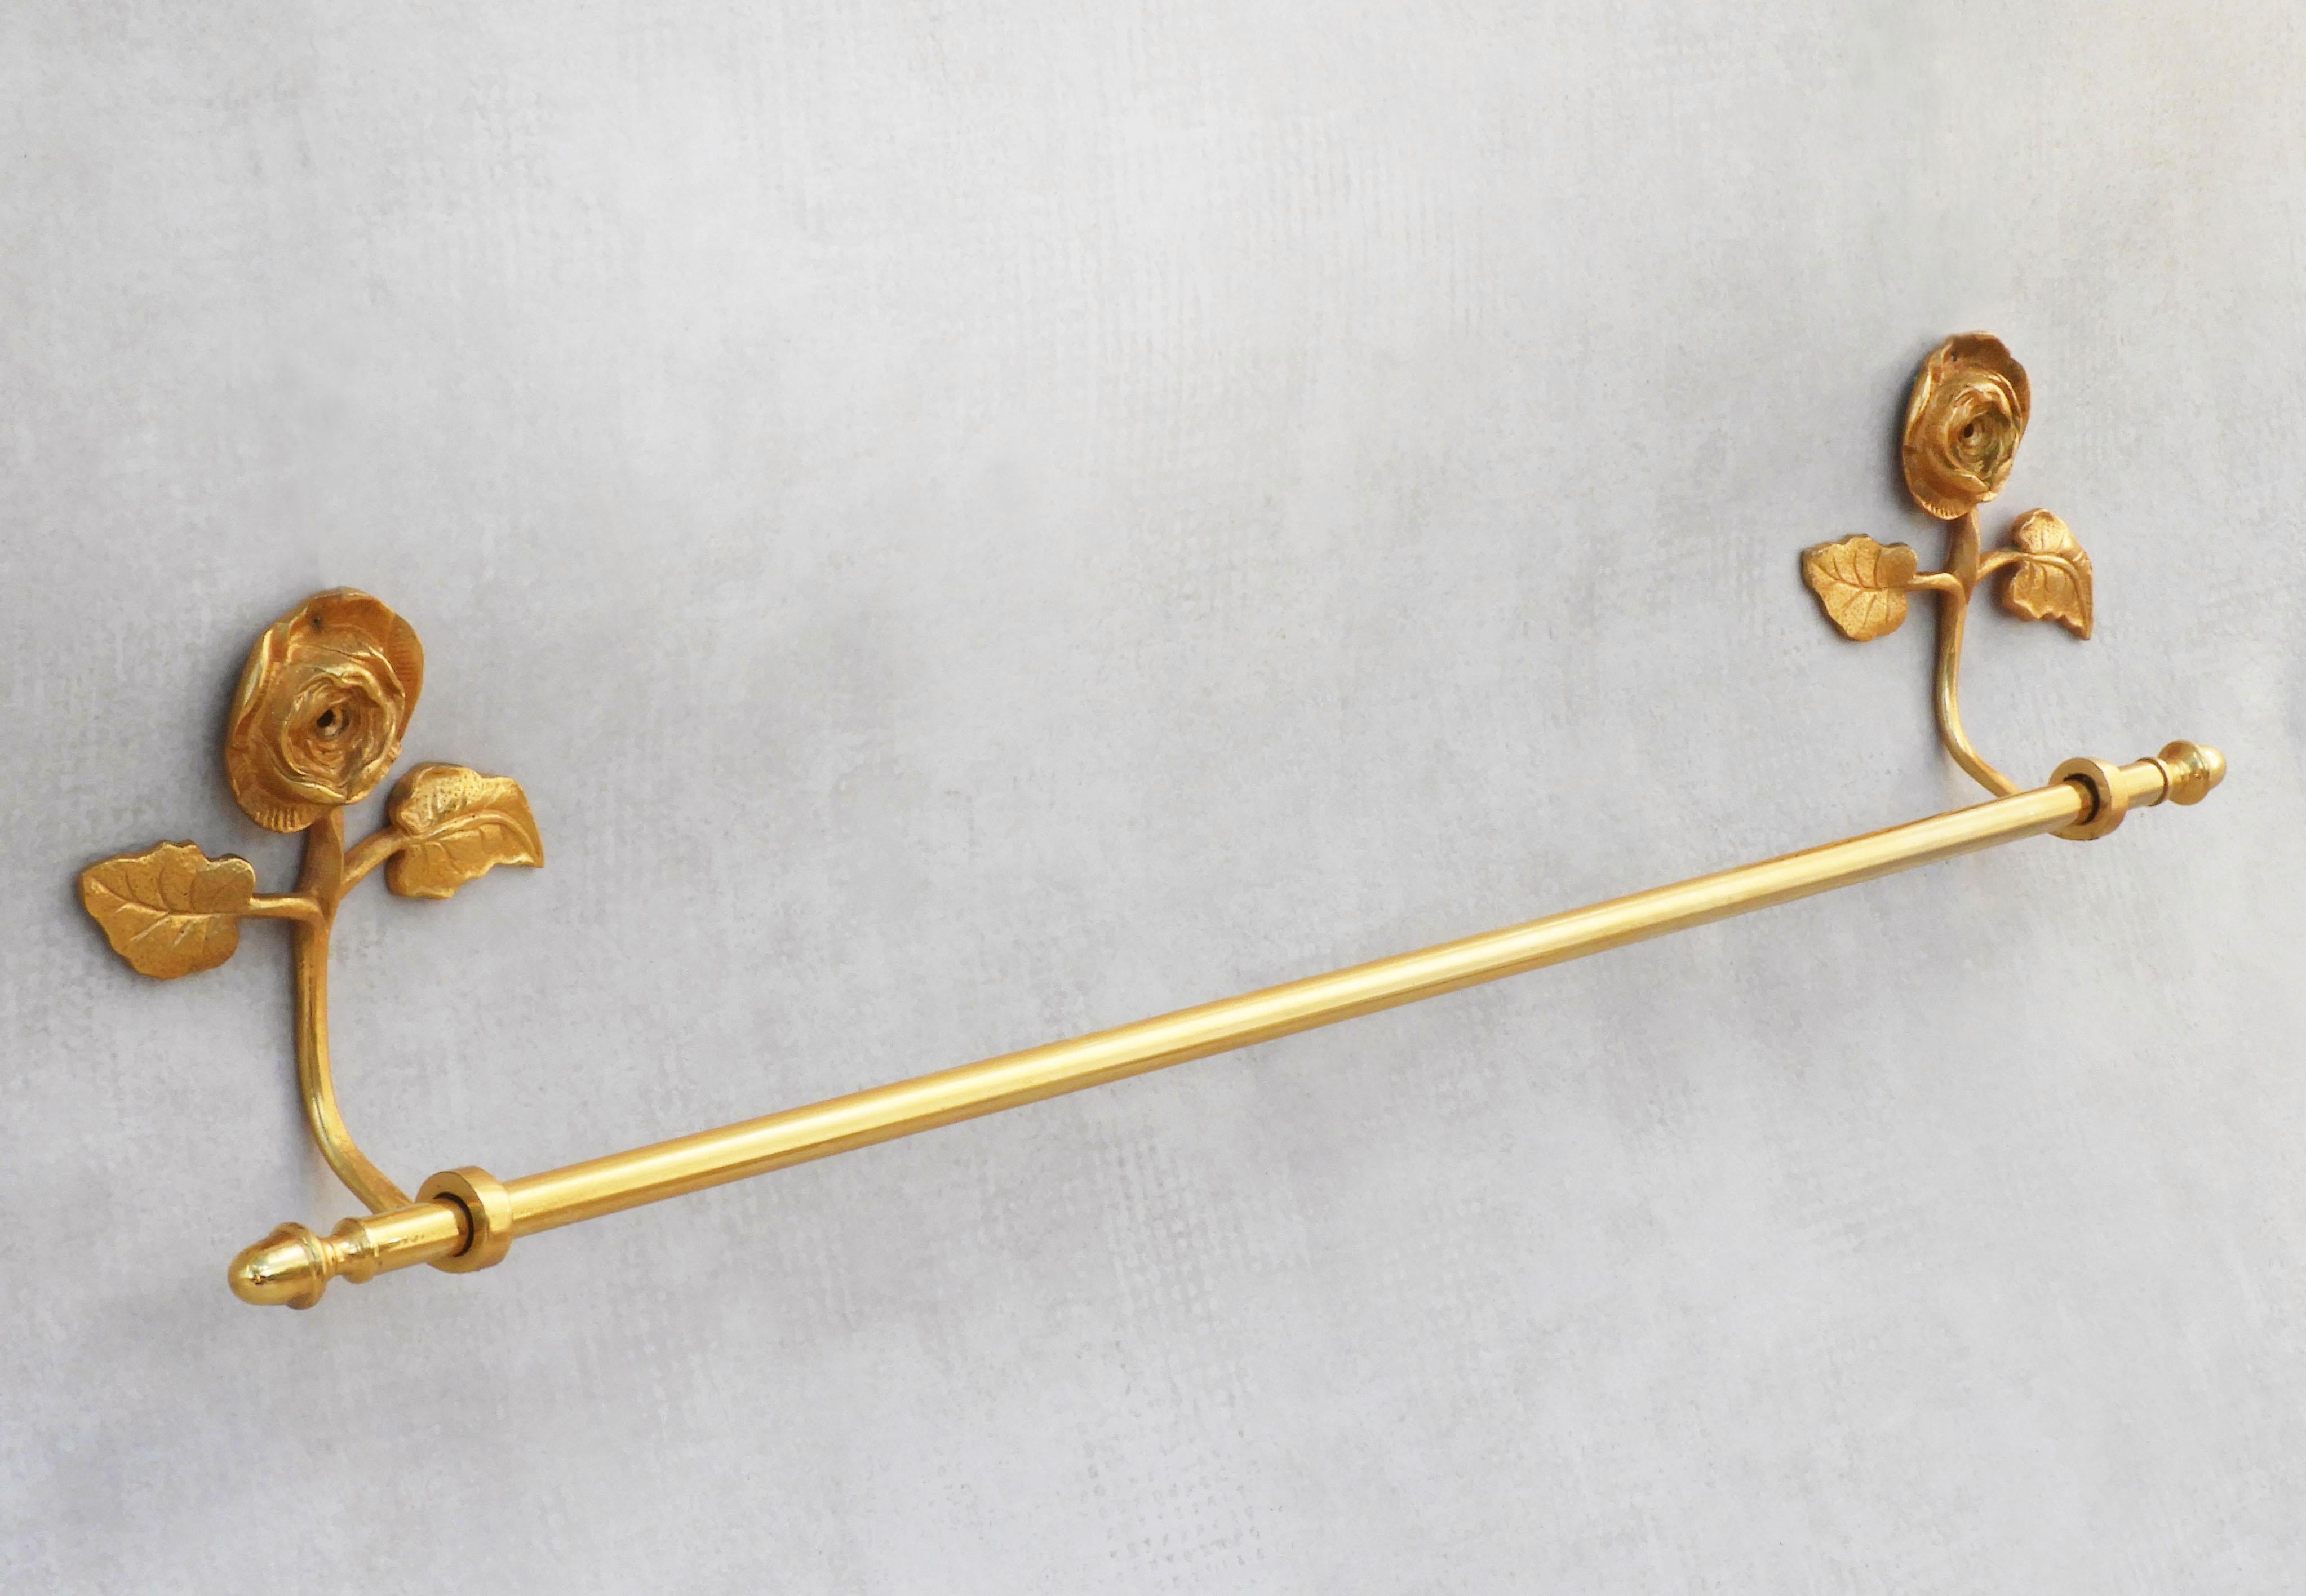 Charming French mid-century rose bloom towel bar or rail in gilded brass C1950. Part of a selection of bathroom accessories and wall light sconces available in the same style - please see our other listings.
In good vintage condition with only light